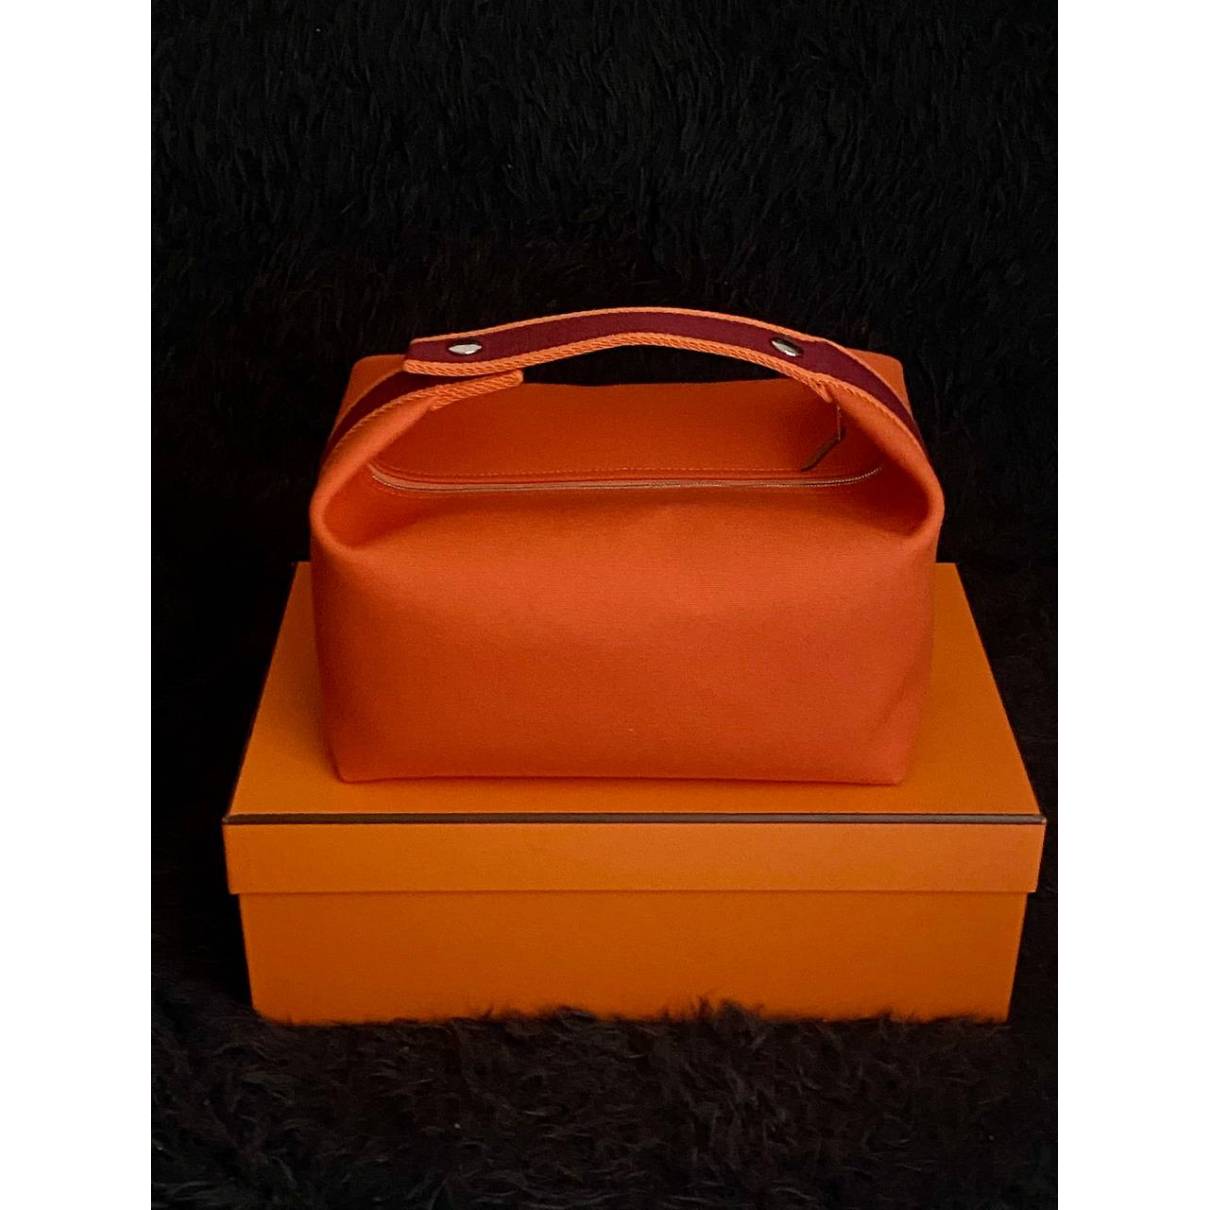 Hermès Orange Feu Toile Small Bride-a-Brac Case Available For Immediate  Sale At Sotheby's